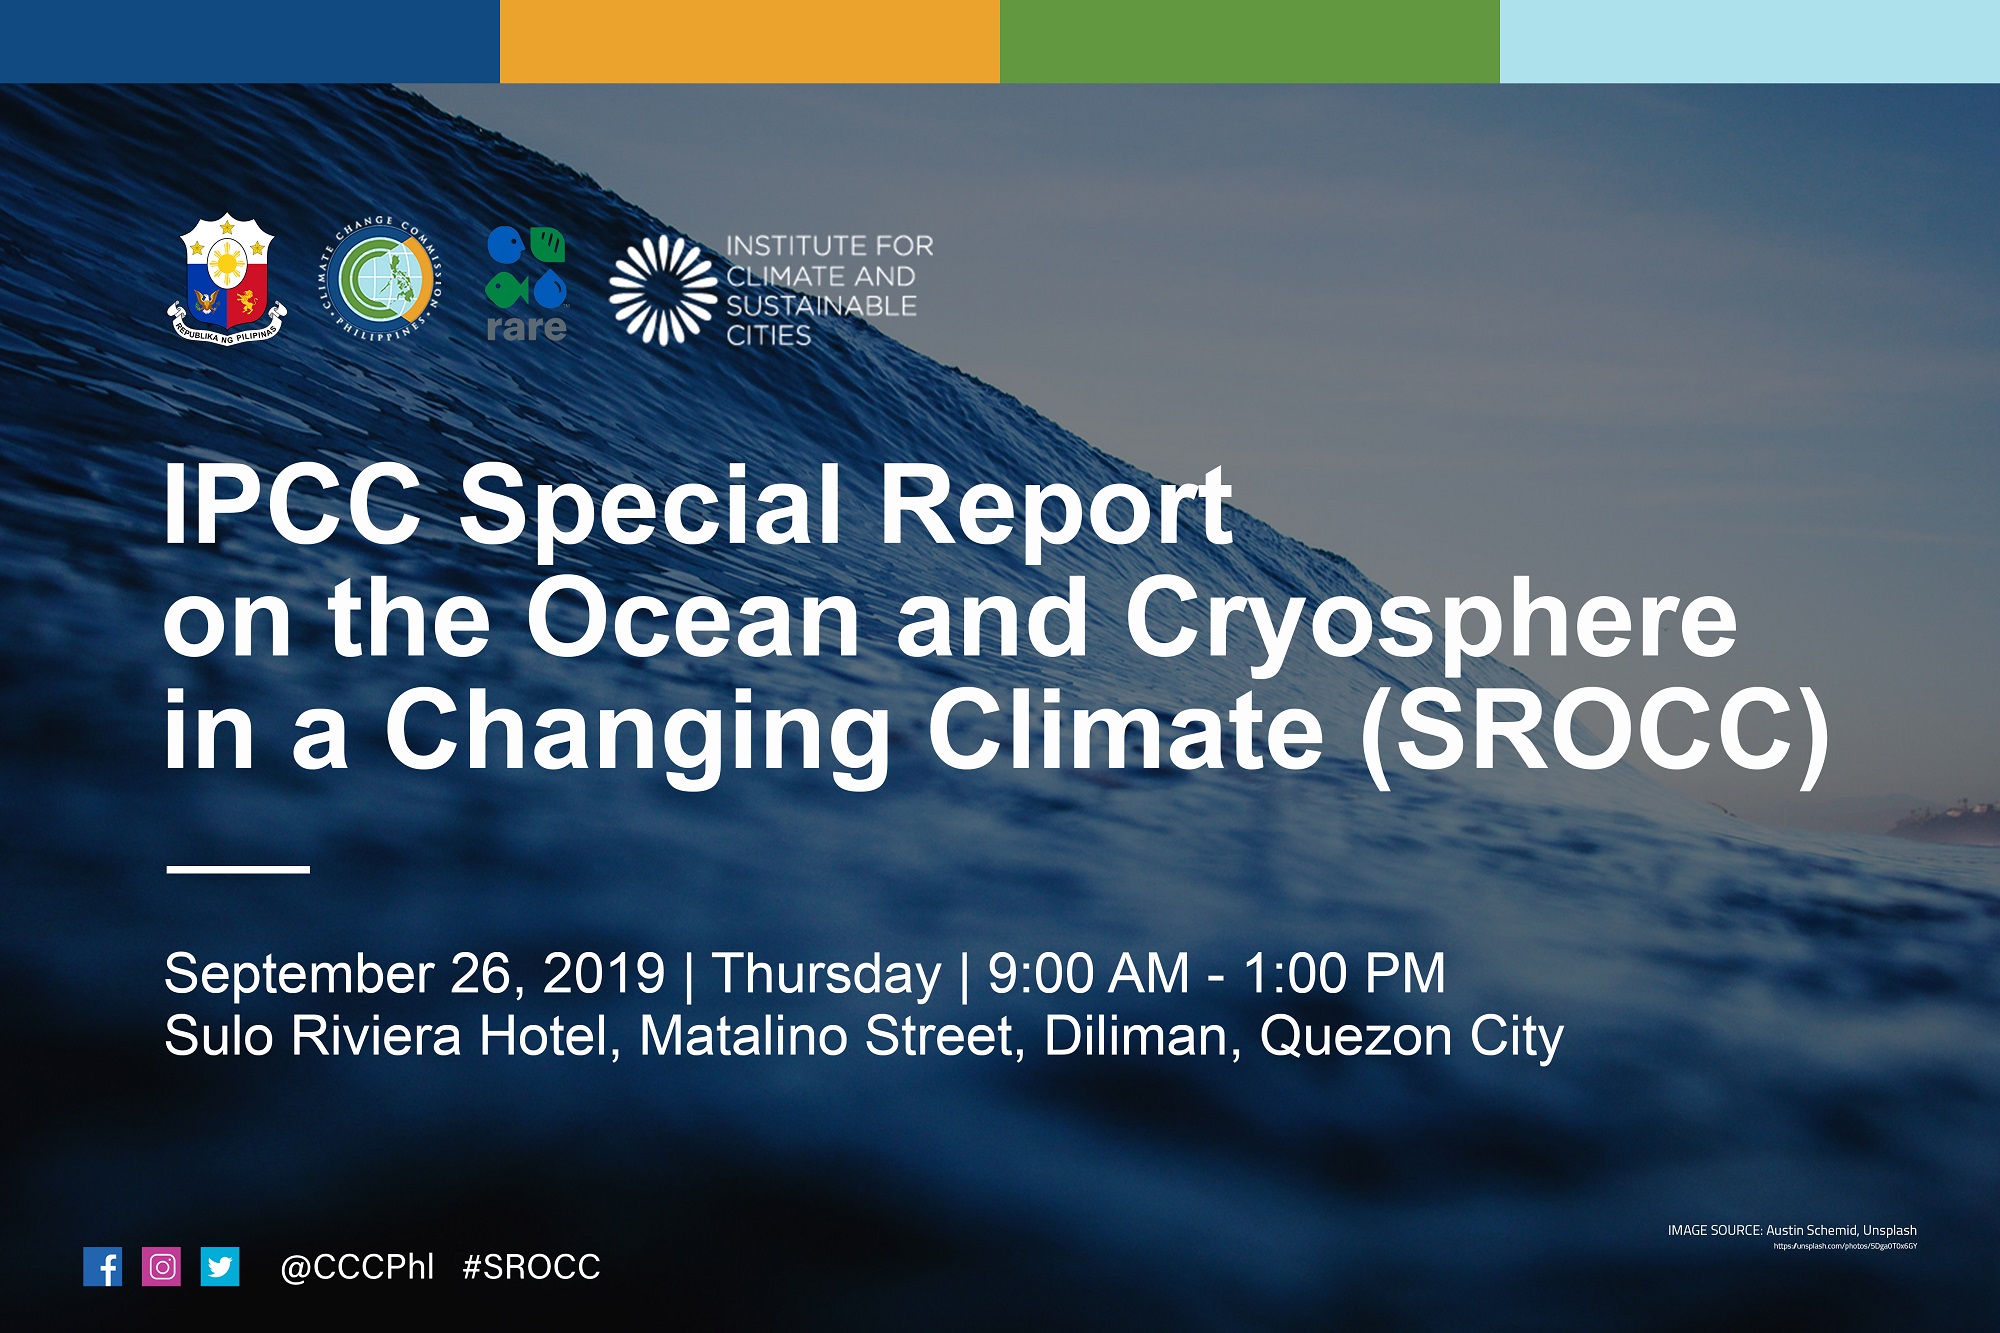 Press Briefing on IPCC Special Report on Ocean and Cryosphere in a Changing Climate